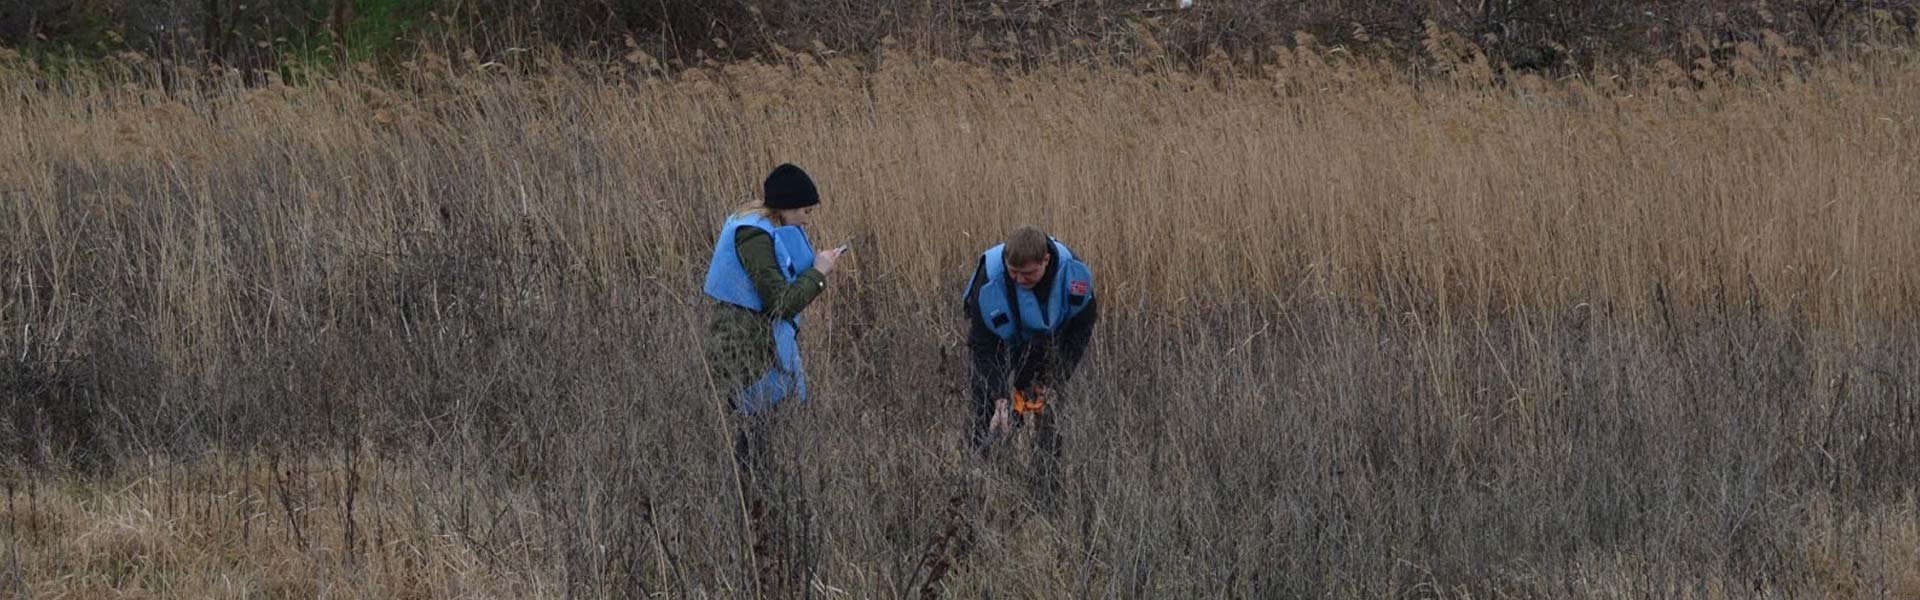 Two researchers take soil samples in a reed bed in Ukraine